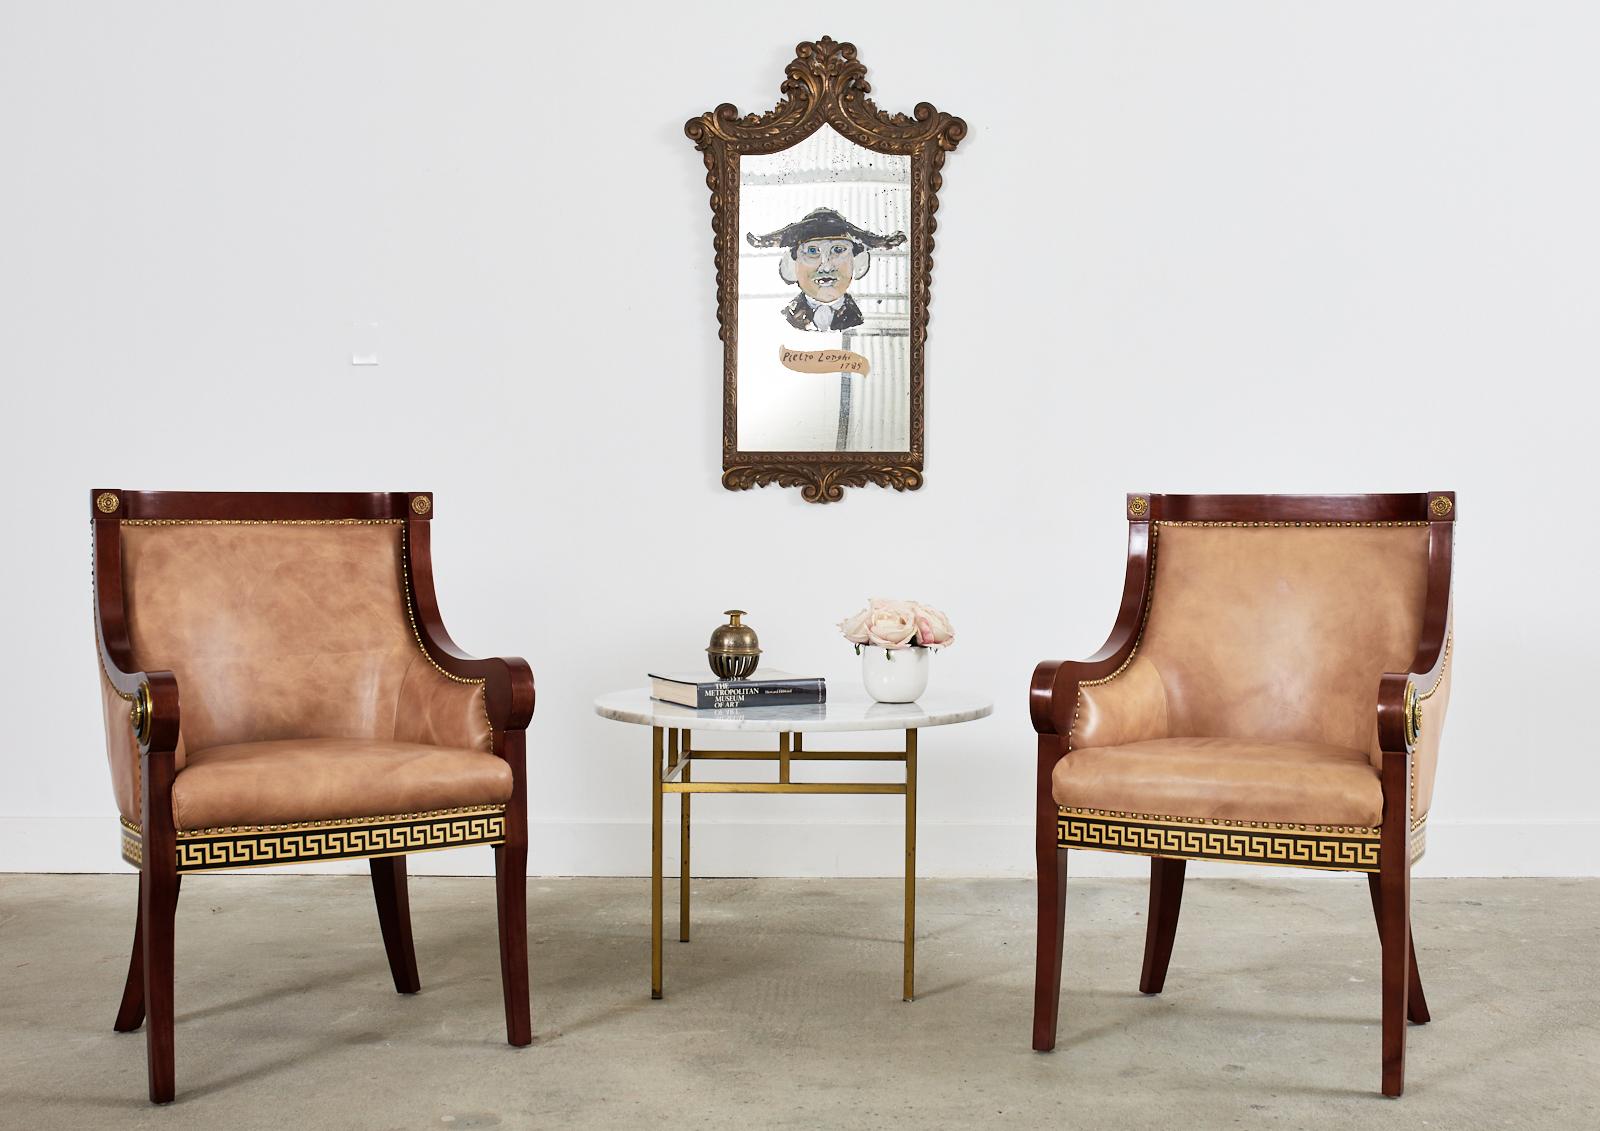 Pair of maximalist empire revival style armchairs featuring Versace inspired motifs. The chairs have a classic gondola shaped frame with faux leather naugahyde upholstery. The faux leather is bordered by shiny brass tack nail heads. The chairs are